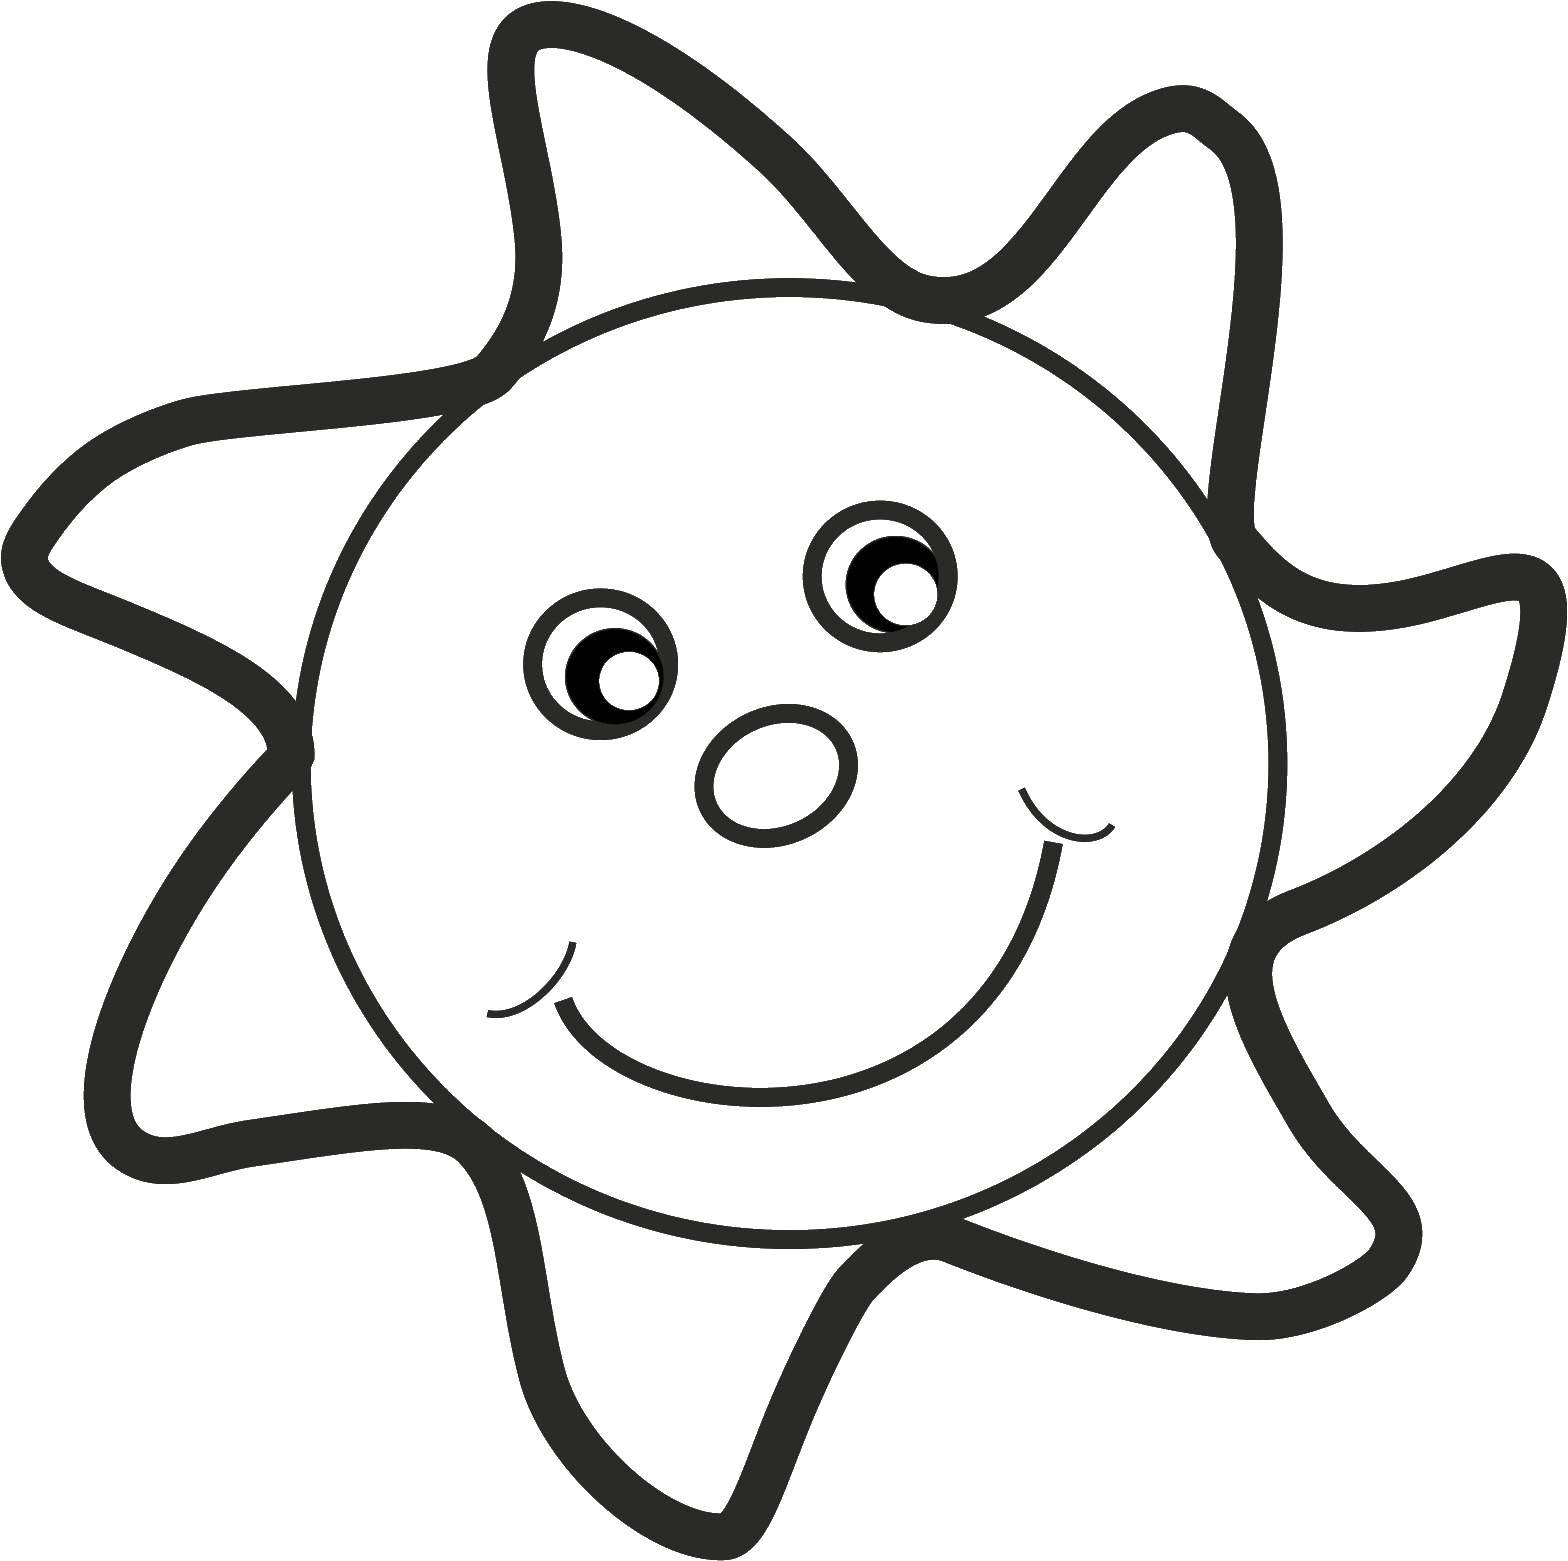 Coloring The sun. Category coloring for little ones. Tags:  the sun.